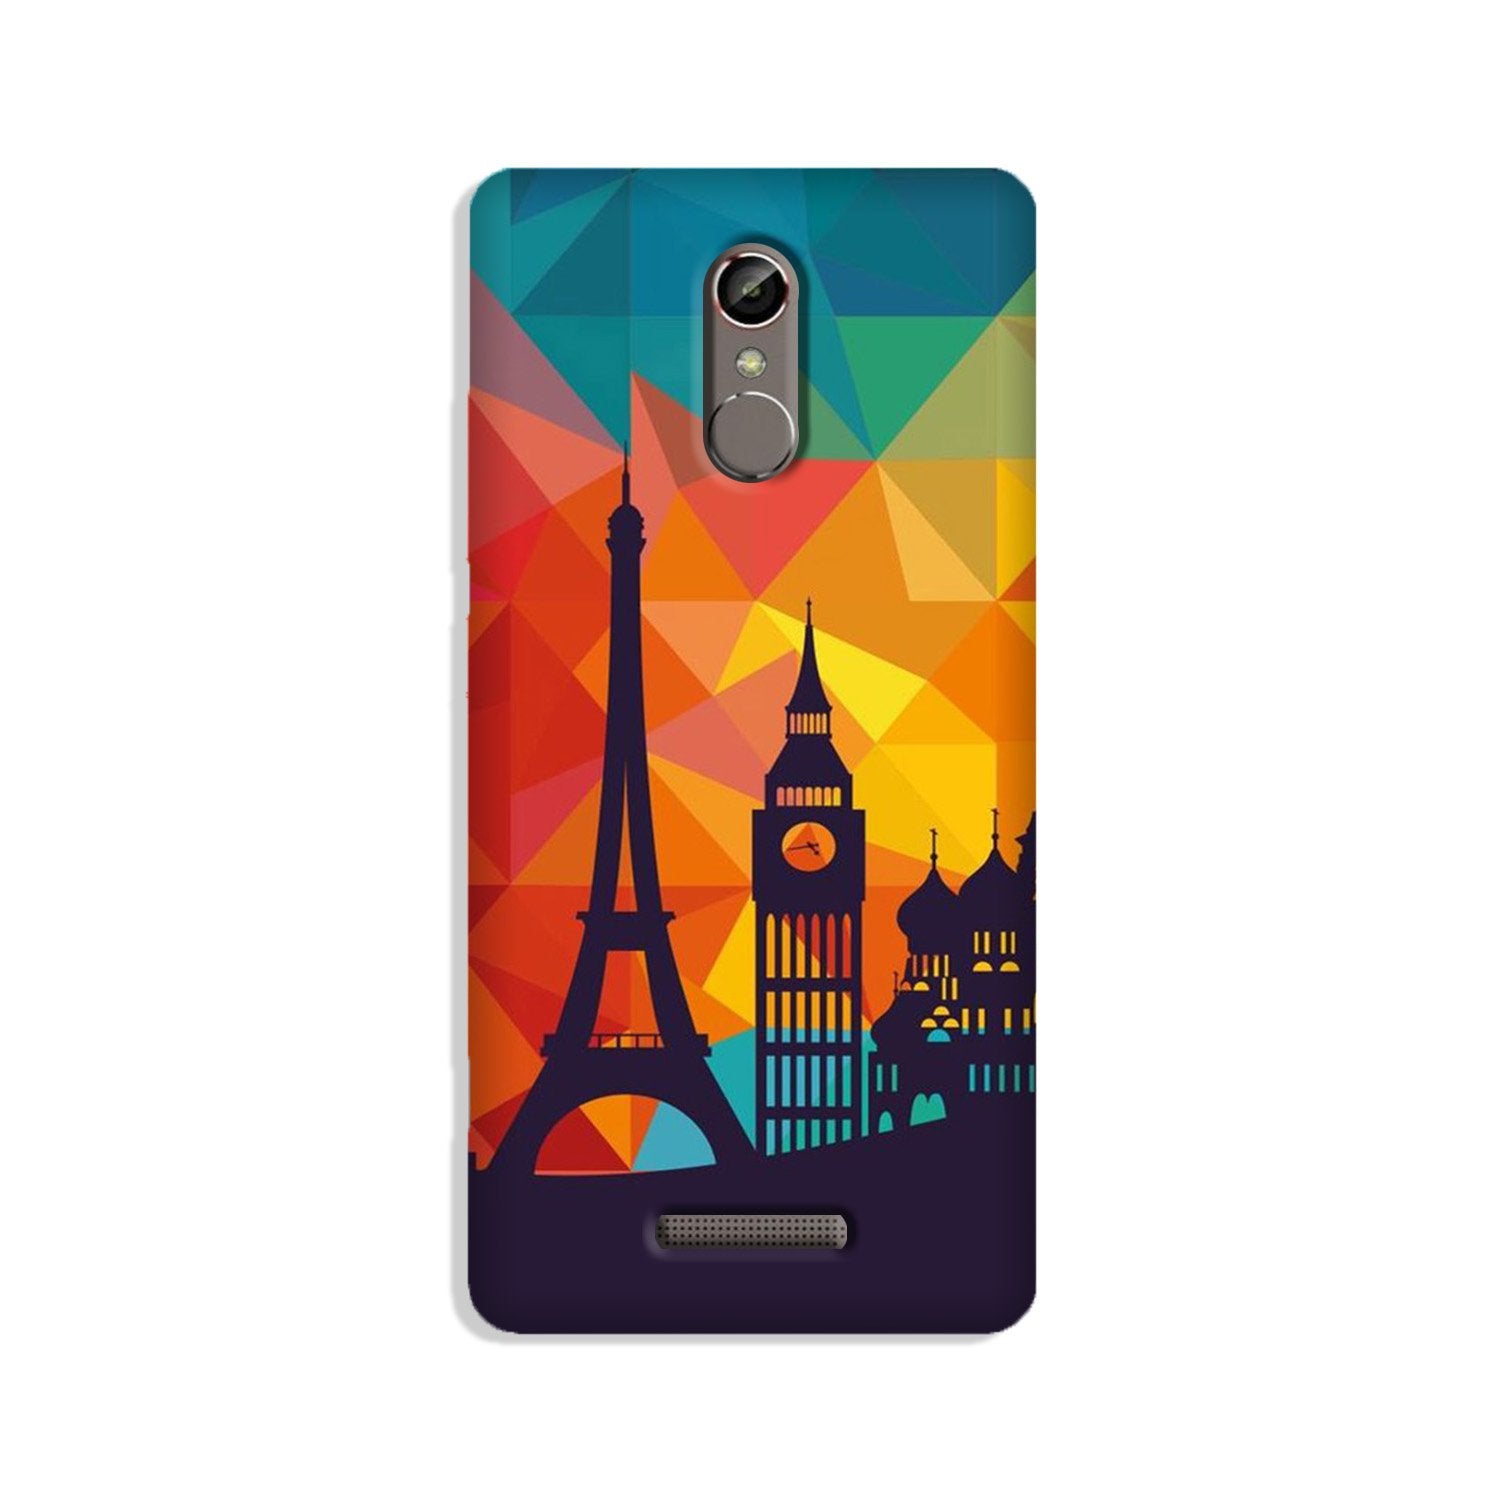 Eiffel Tower2 Case for Gionee S6s